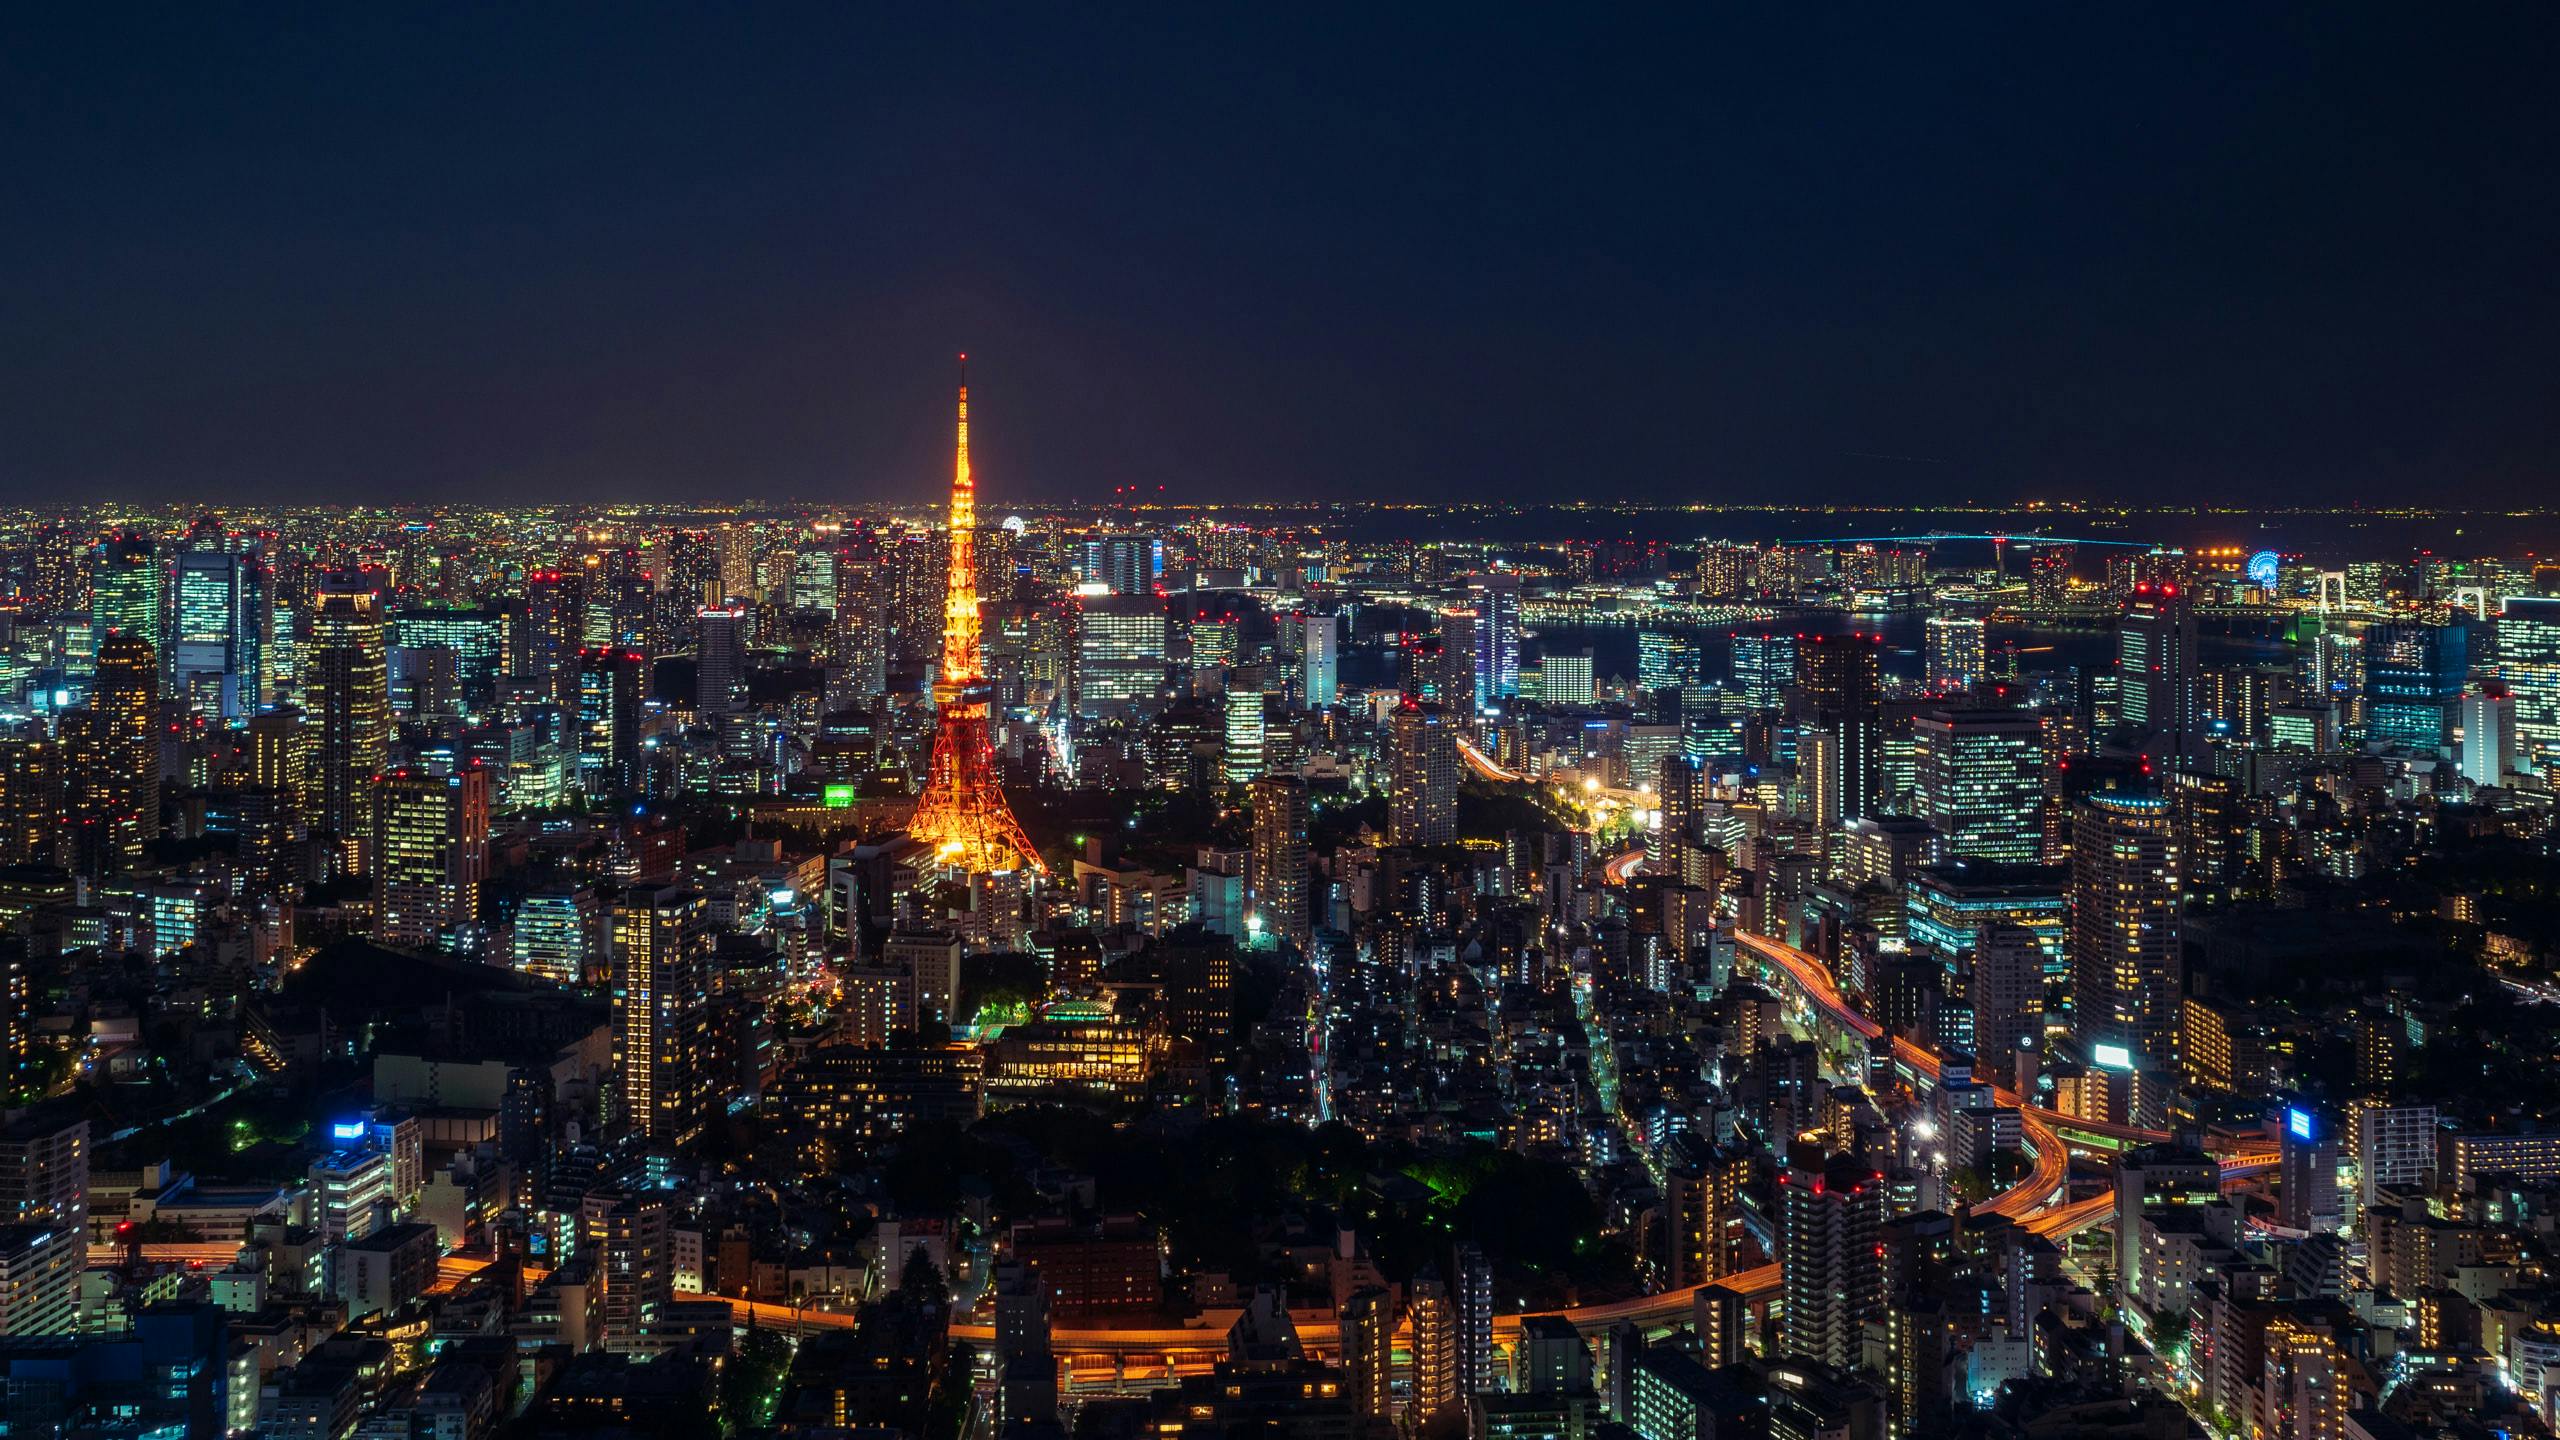 Tokyo city with Tokyo Tower in the foreground